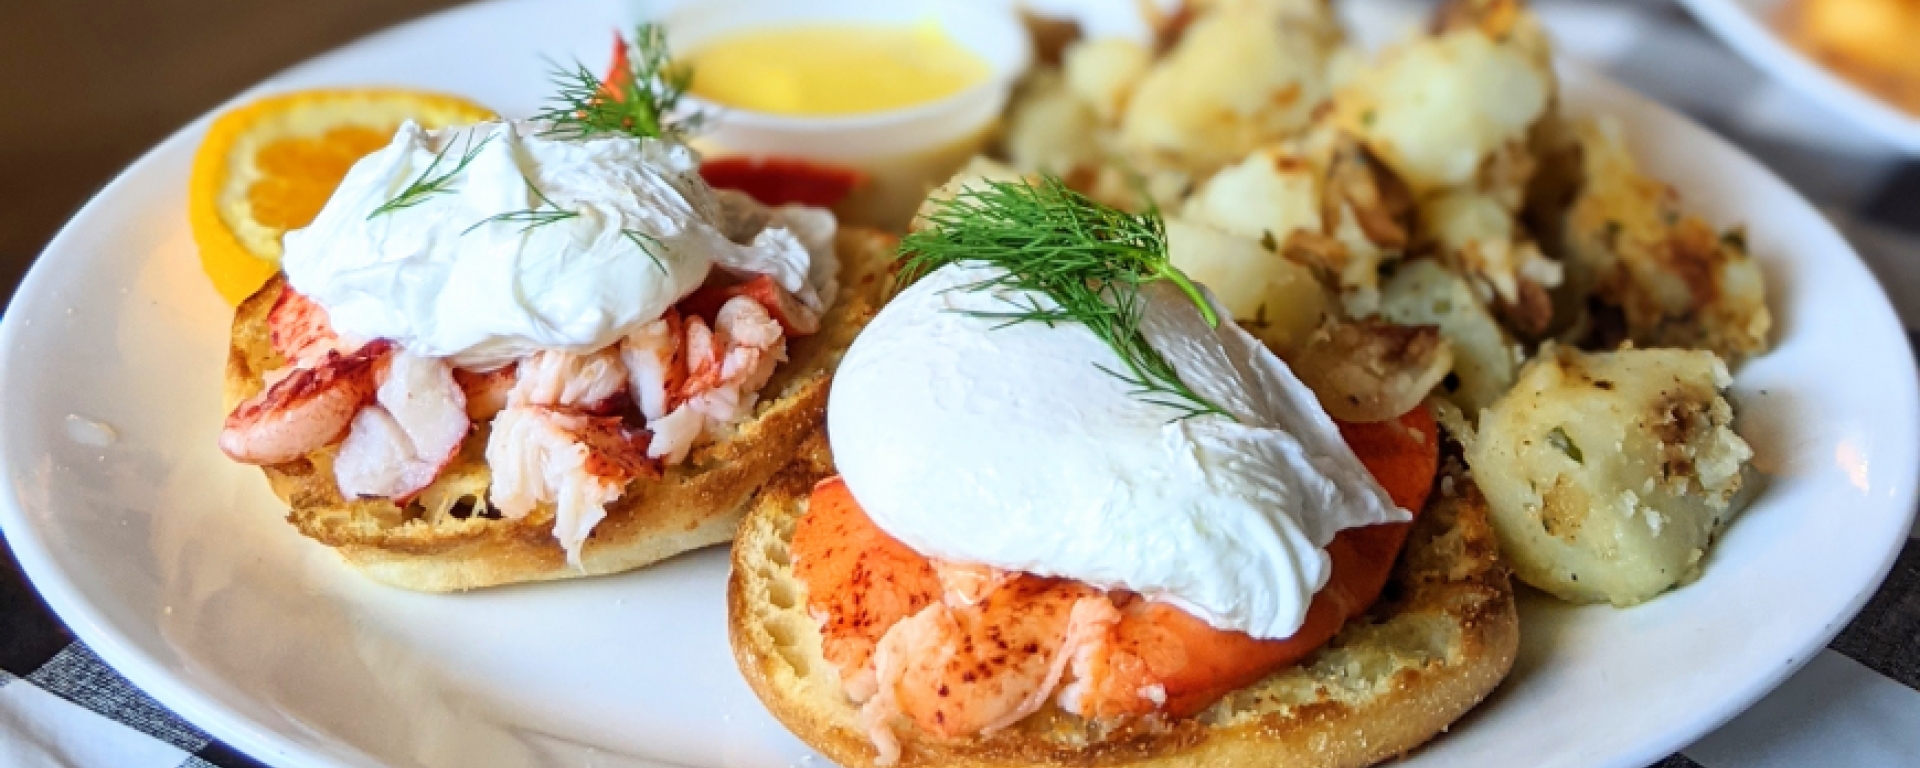 lobster Eggs Benedict with home fries on a white plate